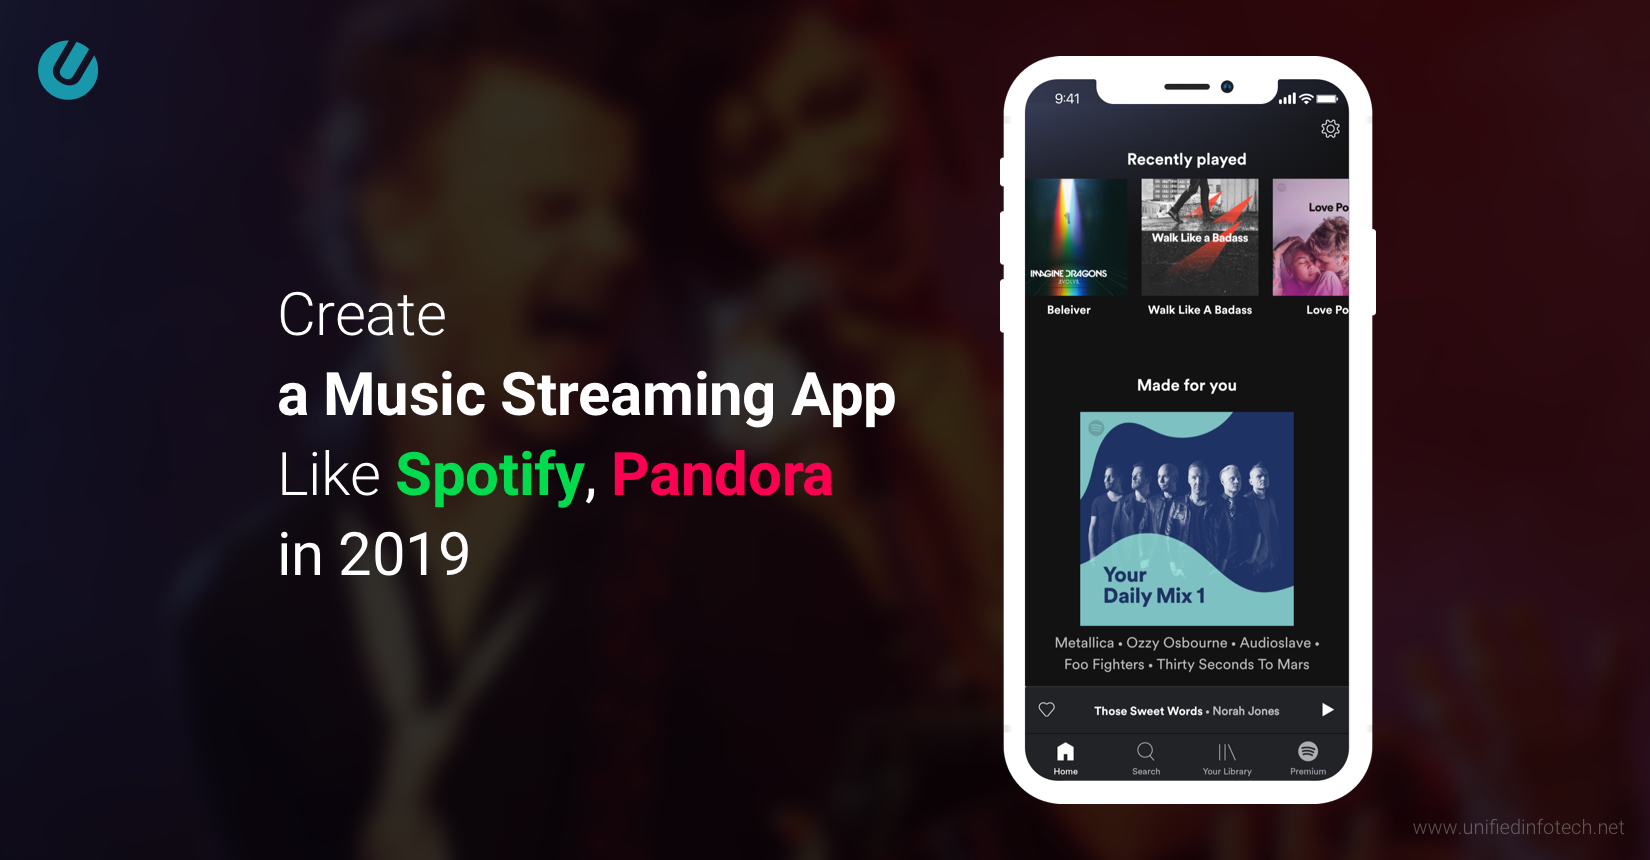 Create A Music Streaming App In 2019 – 9 Step Entrepreneur’s Guide